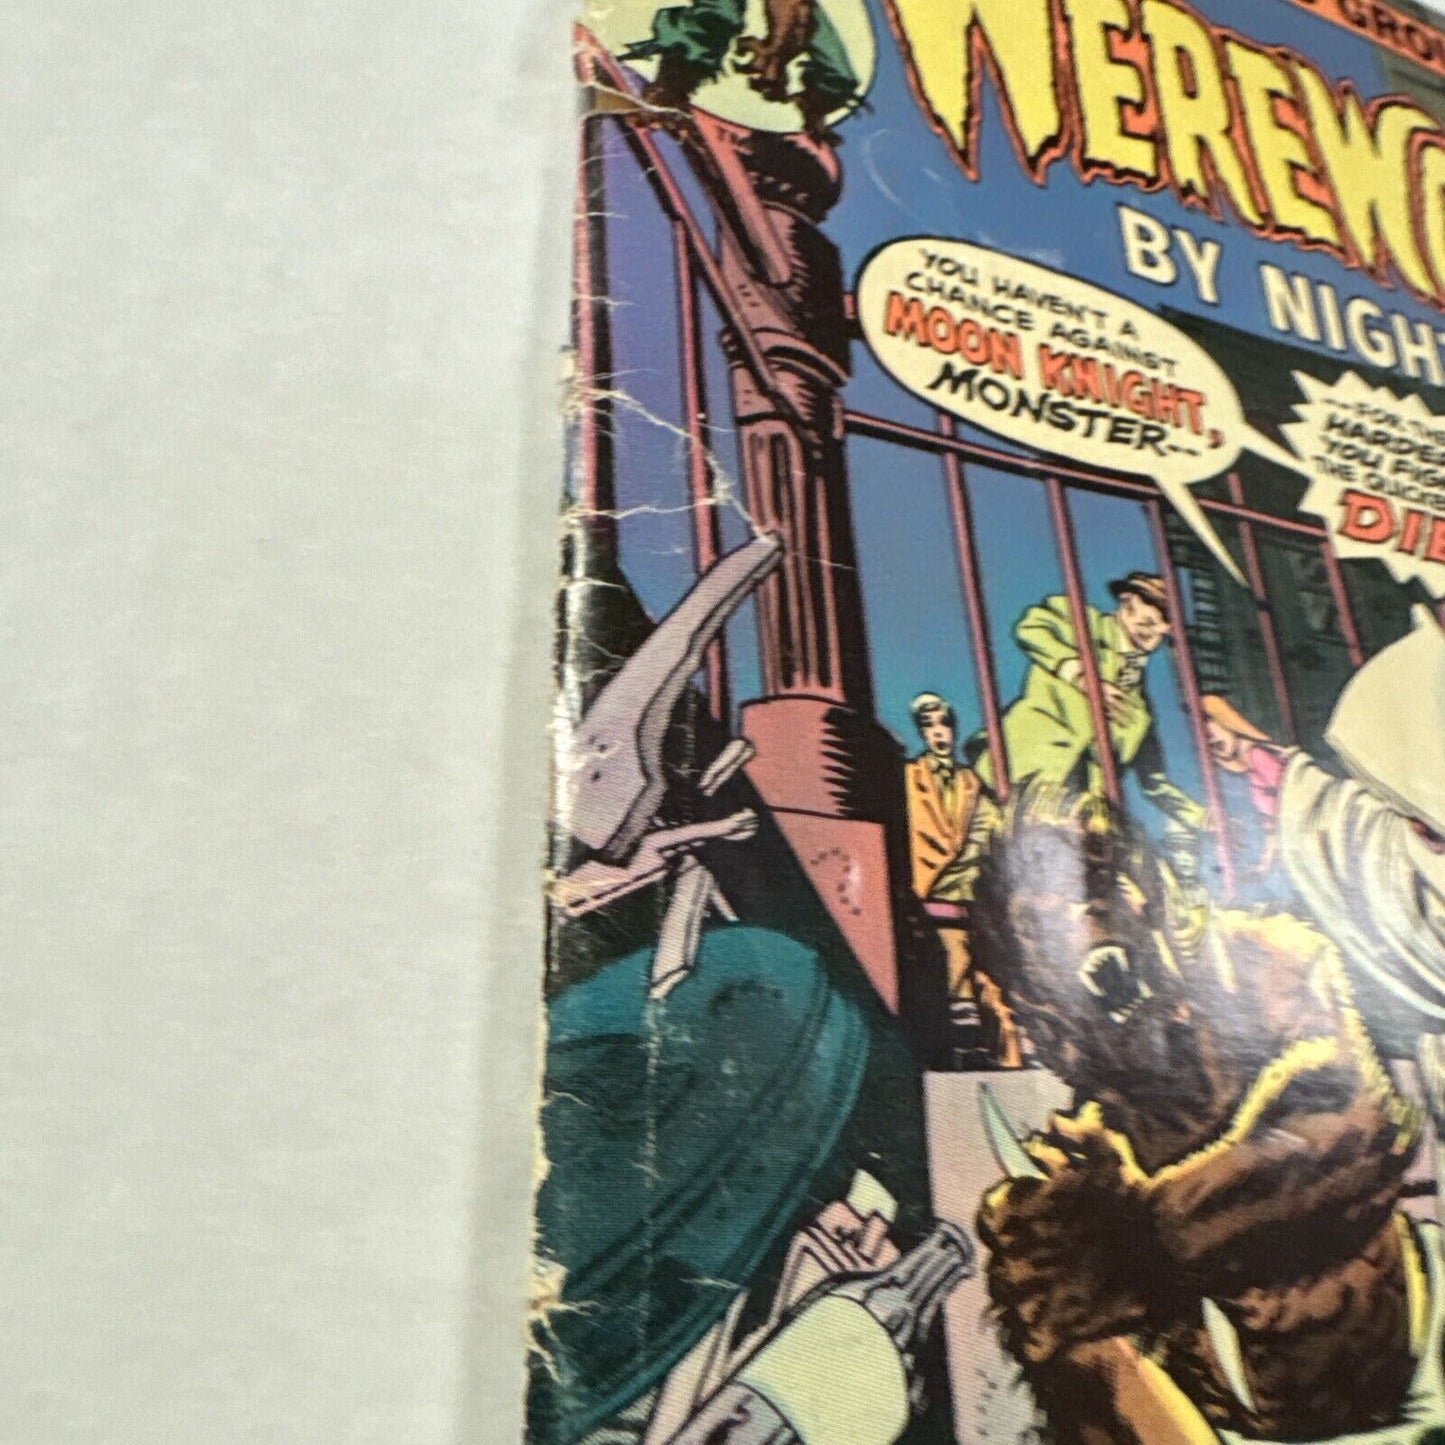 Werewolf By Night 32 Low Grade 1st Moon Knight Complete Detatched Cover